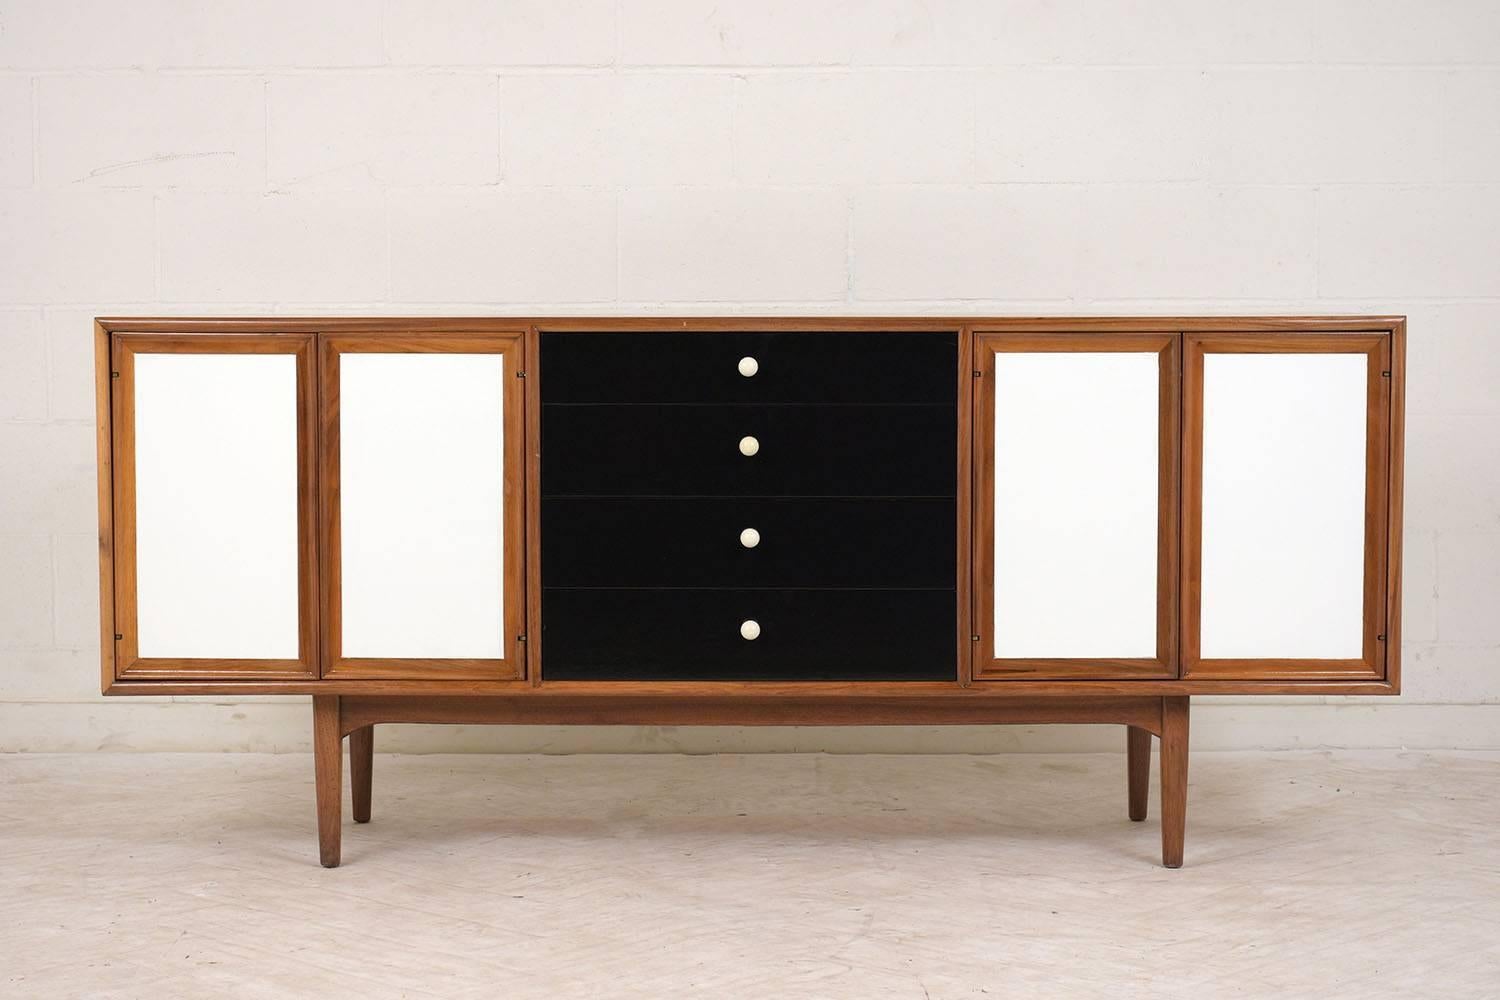 This 1960s Mid-Century Modern credenza is made by Drexel Declaration and has been completely restored. The walnut wood credenza is finished in a rich walnut color with a lacquered finish. There are for cabinet doors that are painted a bright white